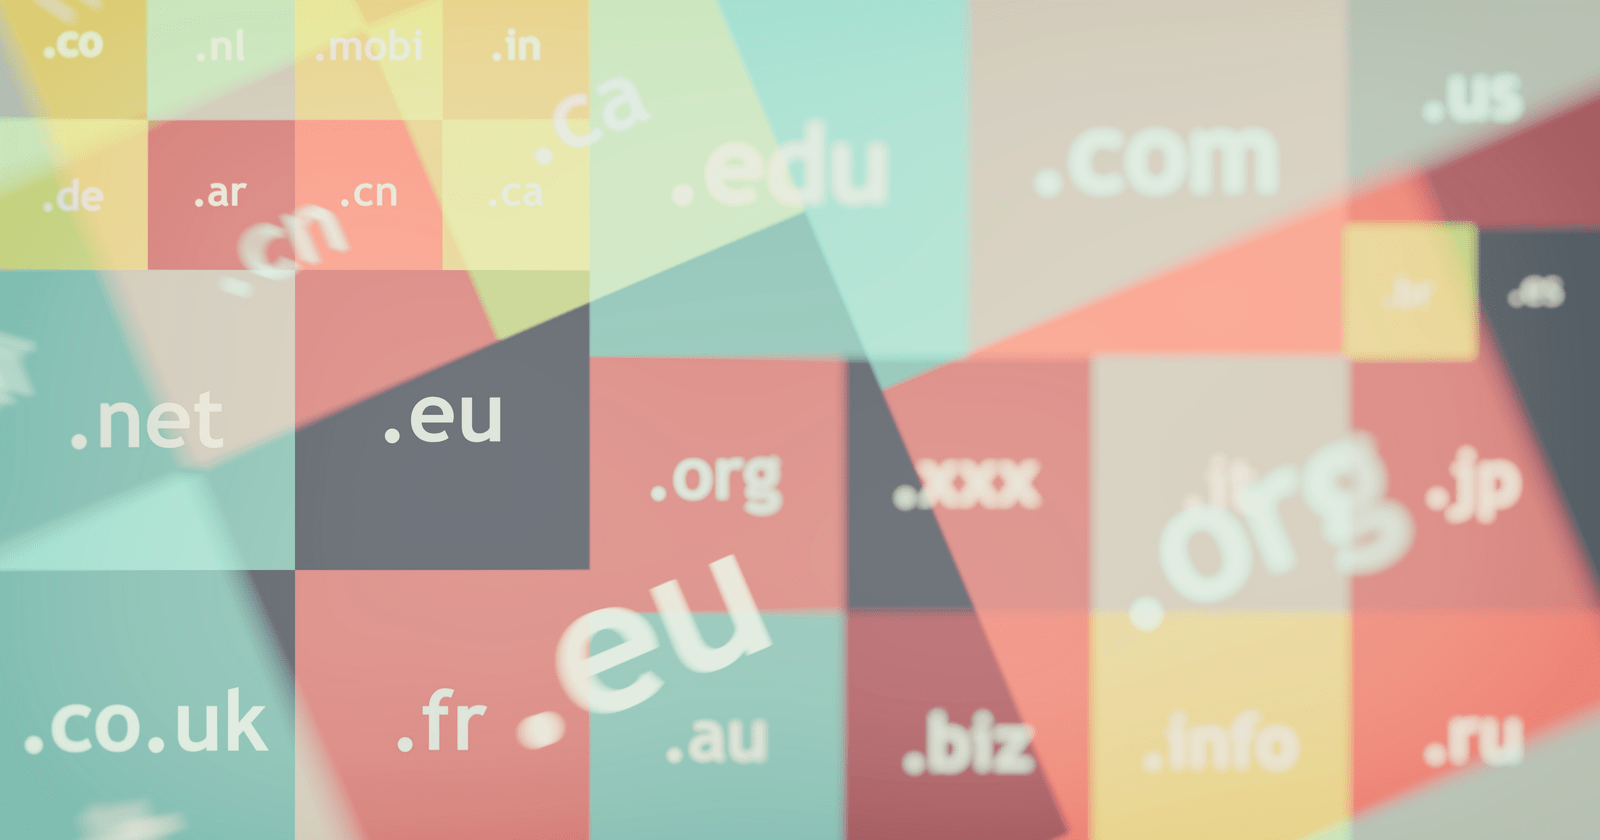 Top-Level Domain & Other Restrictions for International SEO